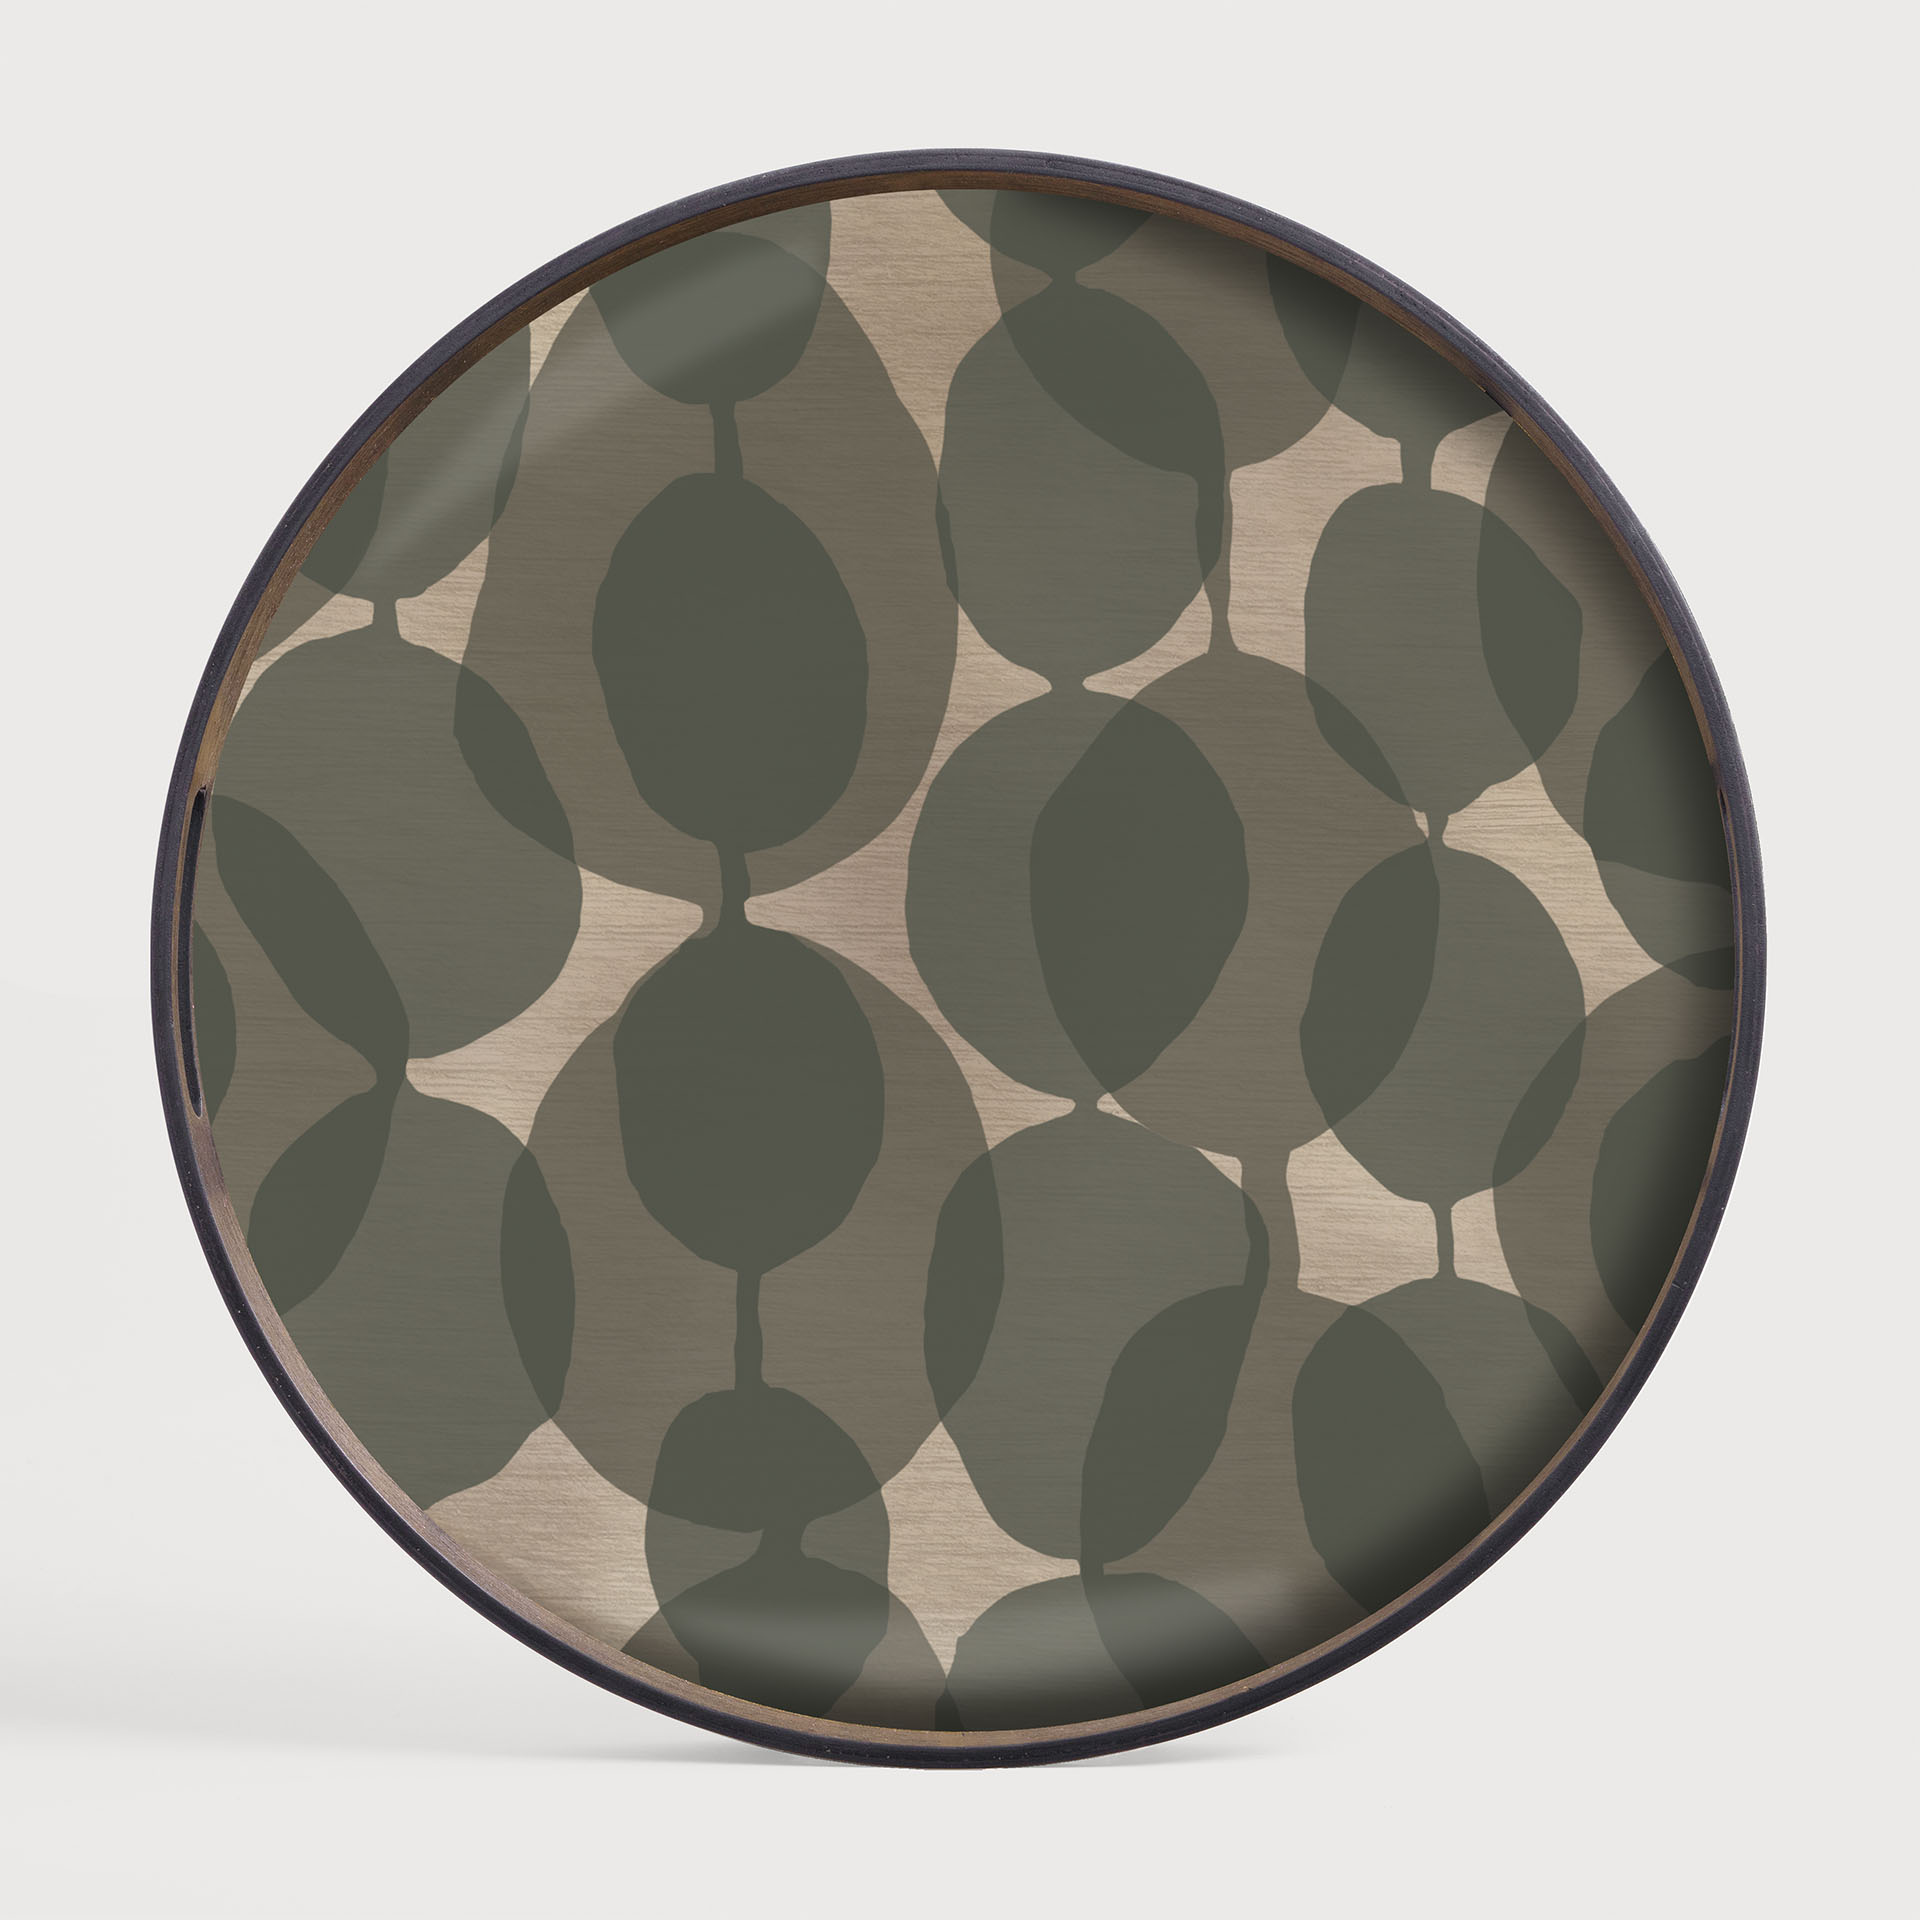 [20438*] Connected Dots glass tray